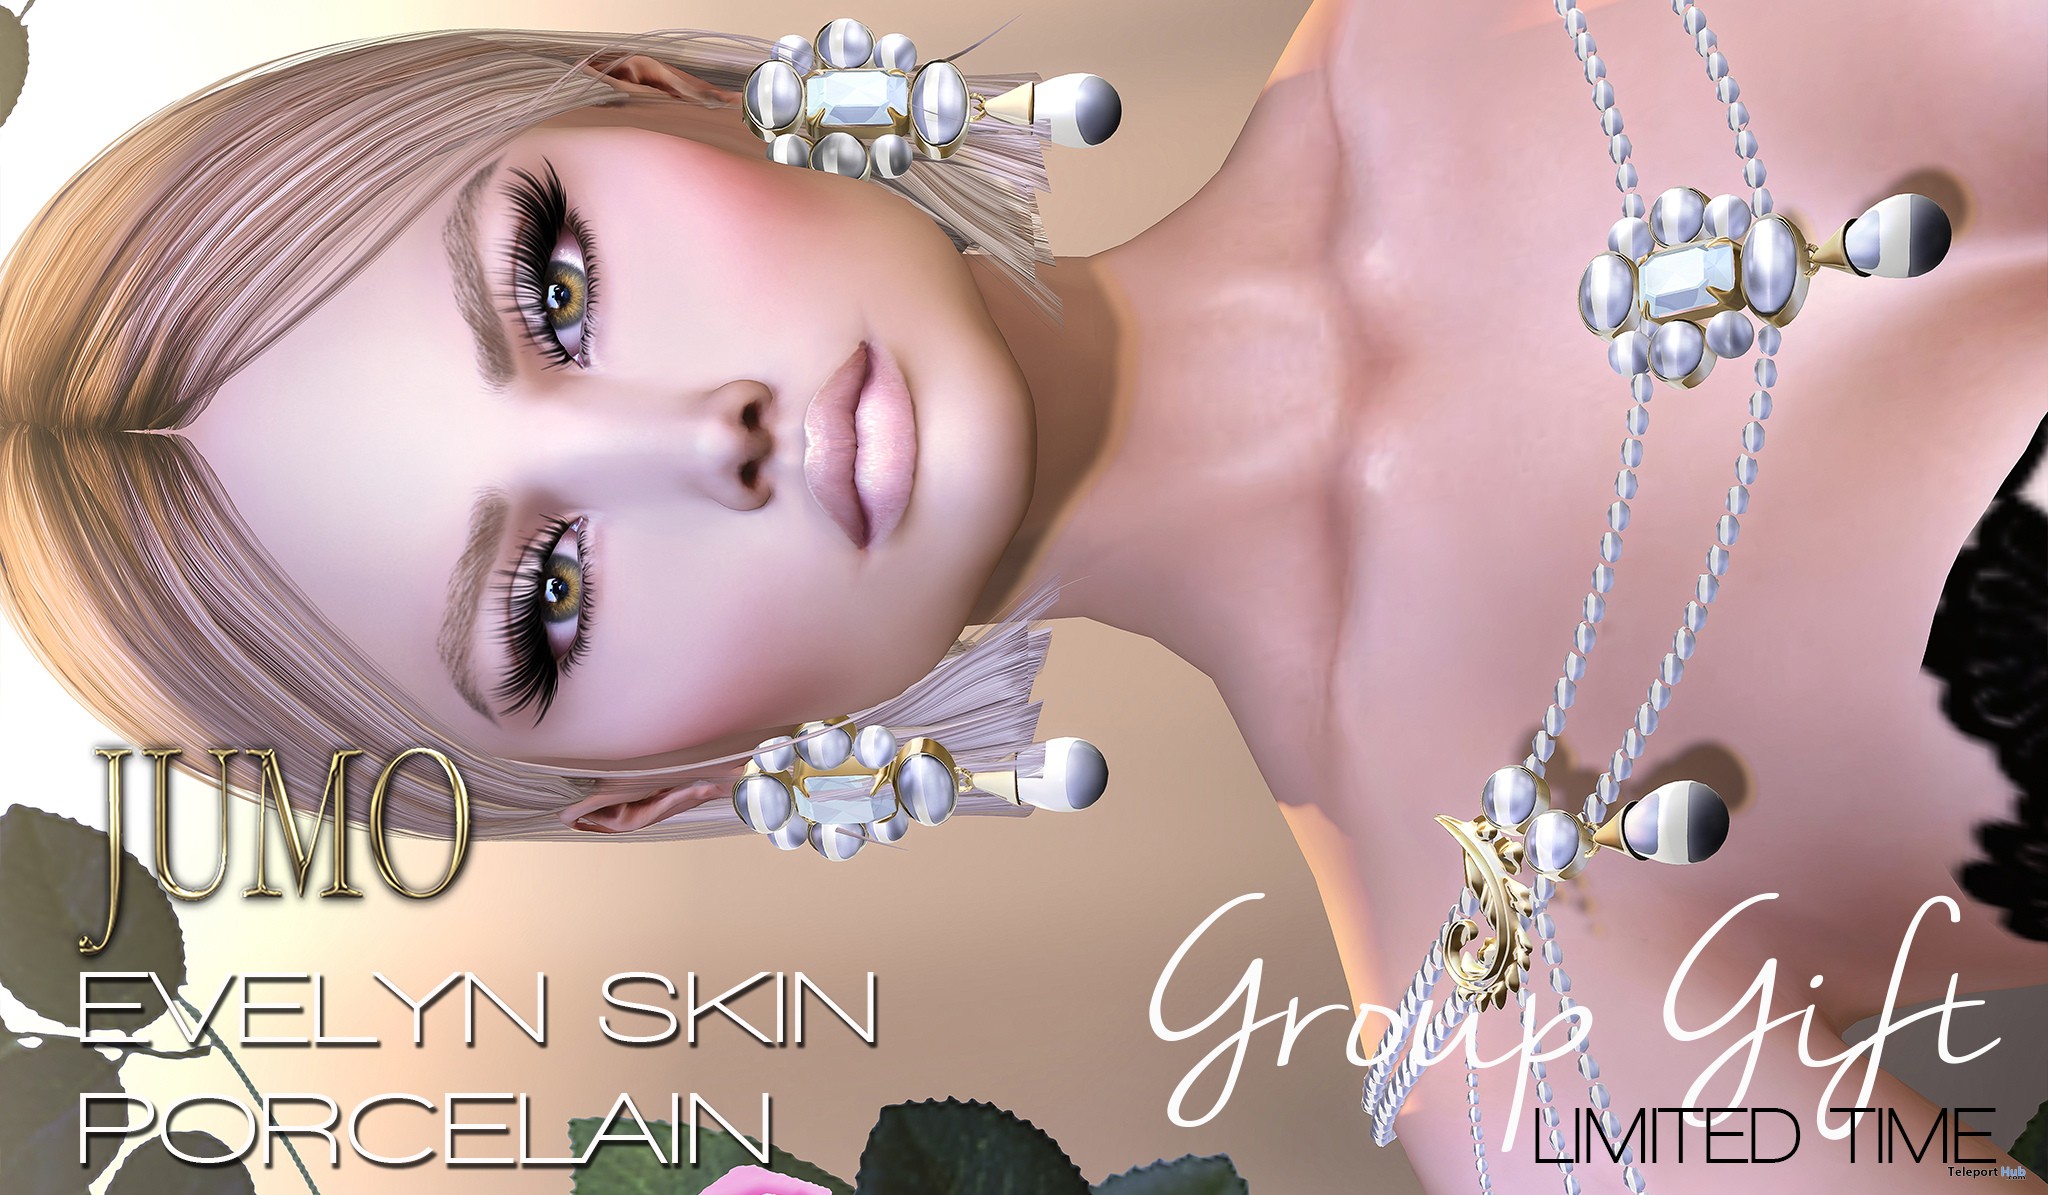 Evelyn Skin Porcelain Limited Time Group Gift by JUMO - Teleport Hub - teleporthub.com